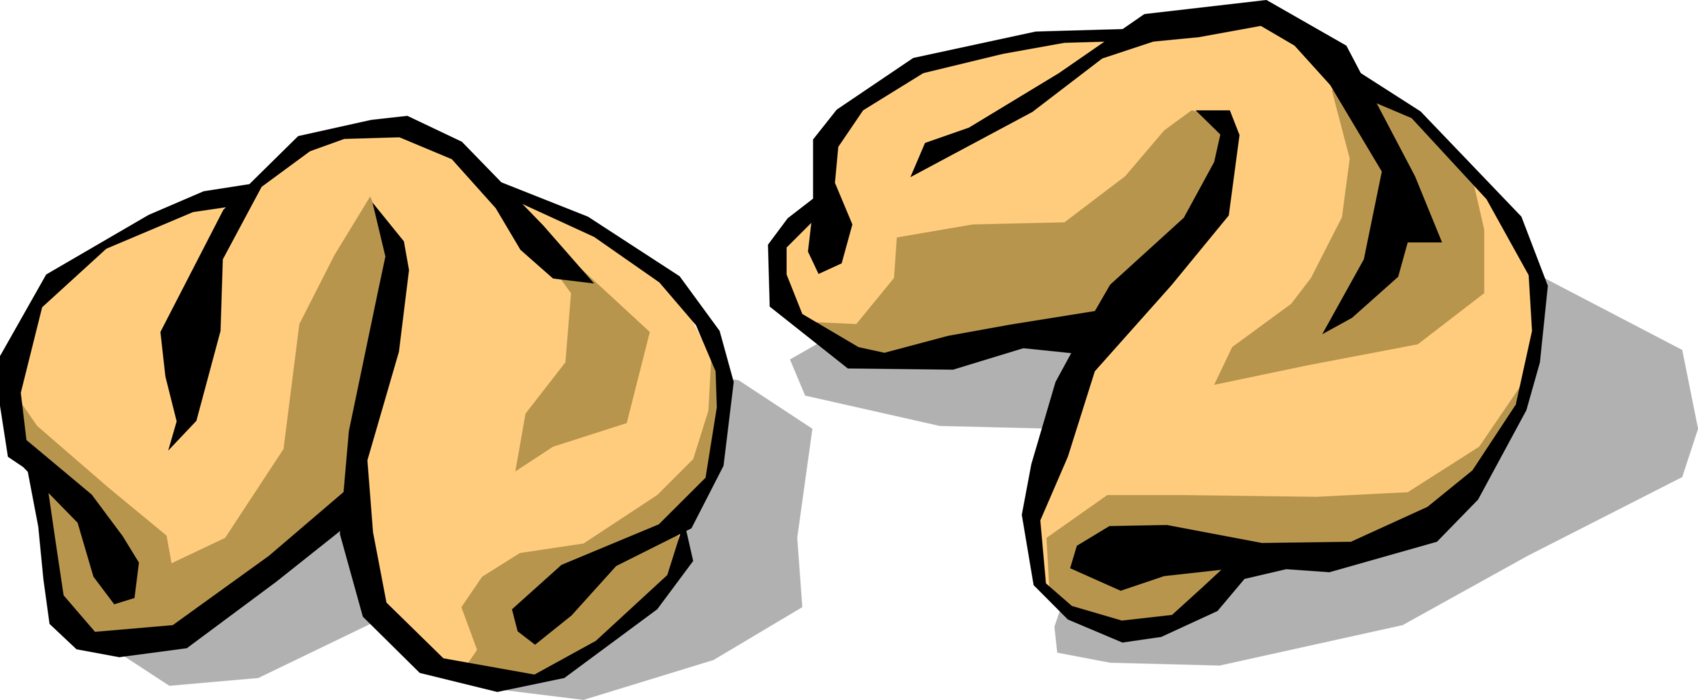 Vector Illustration of Chinese Cuisine Food Fortune Cookies Contain Aphorism, or Vague Prophecy